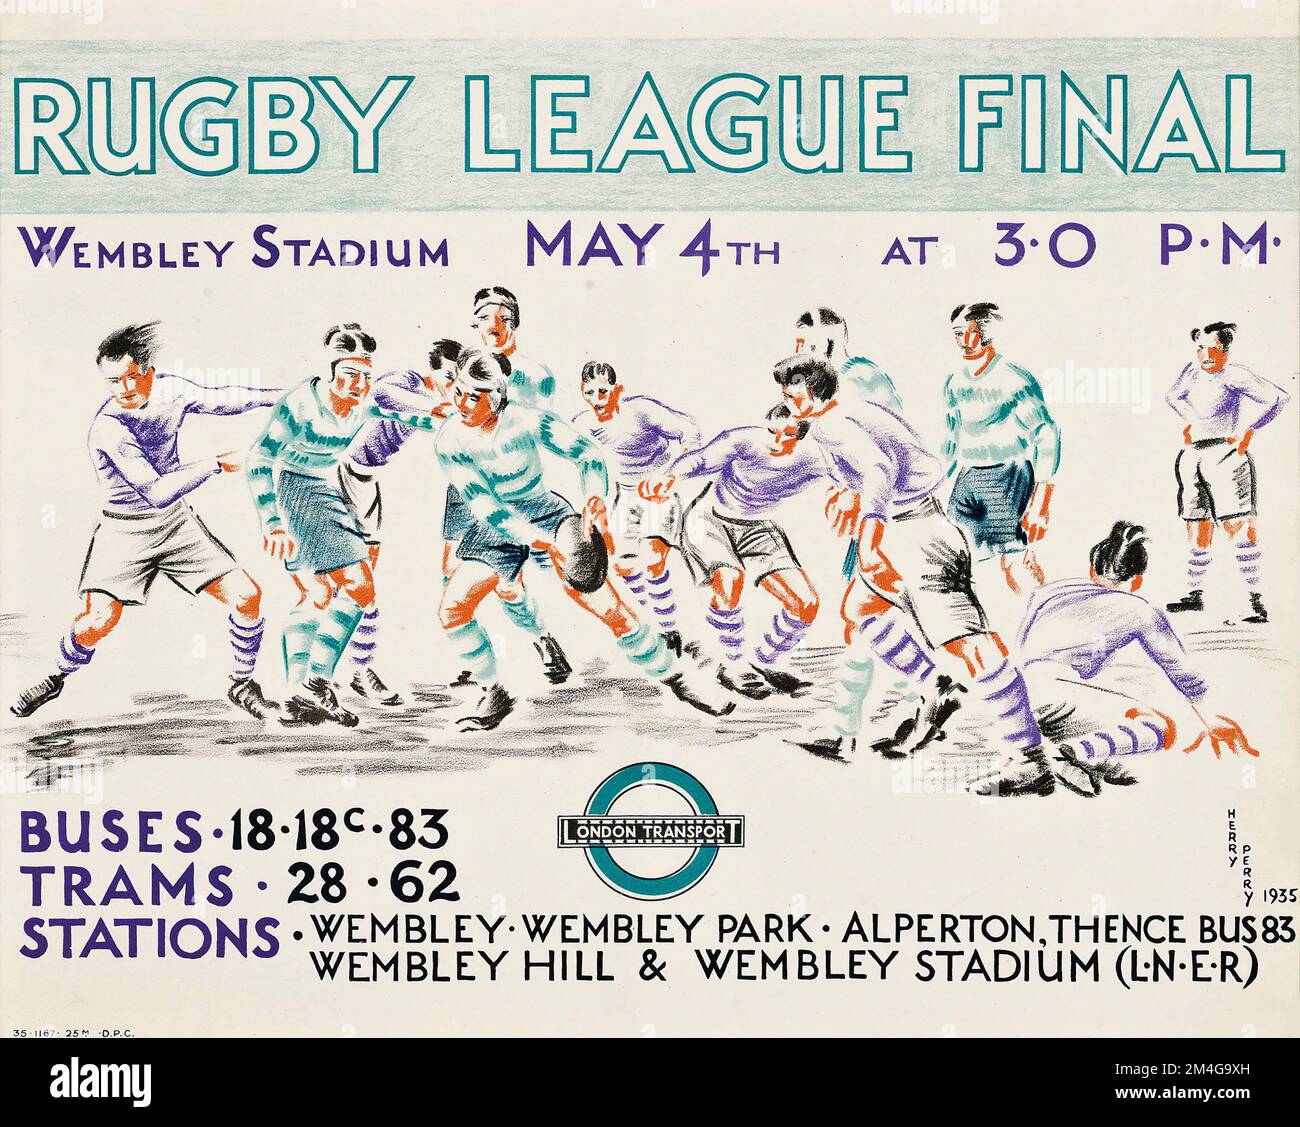 London Underground poster - Herry (Heather) Perry artwork - RUGBY LEAGUE FINAL 1935 Stock Photo